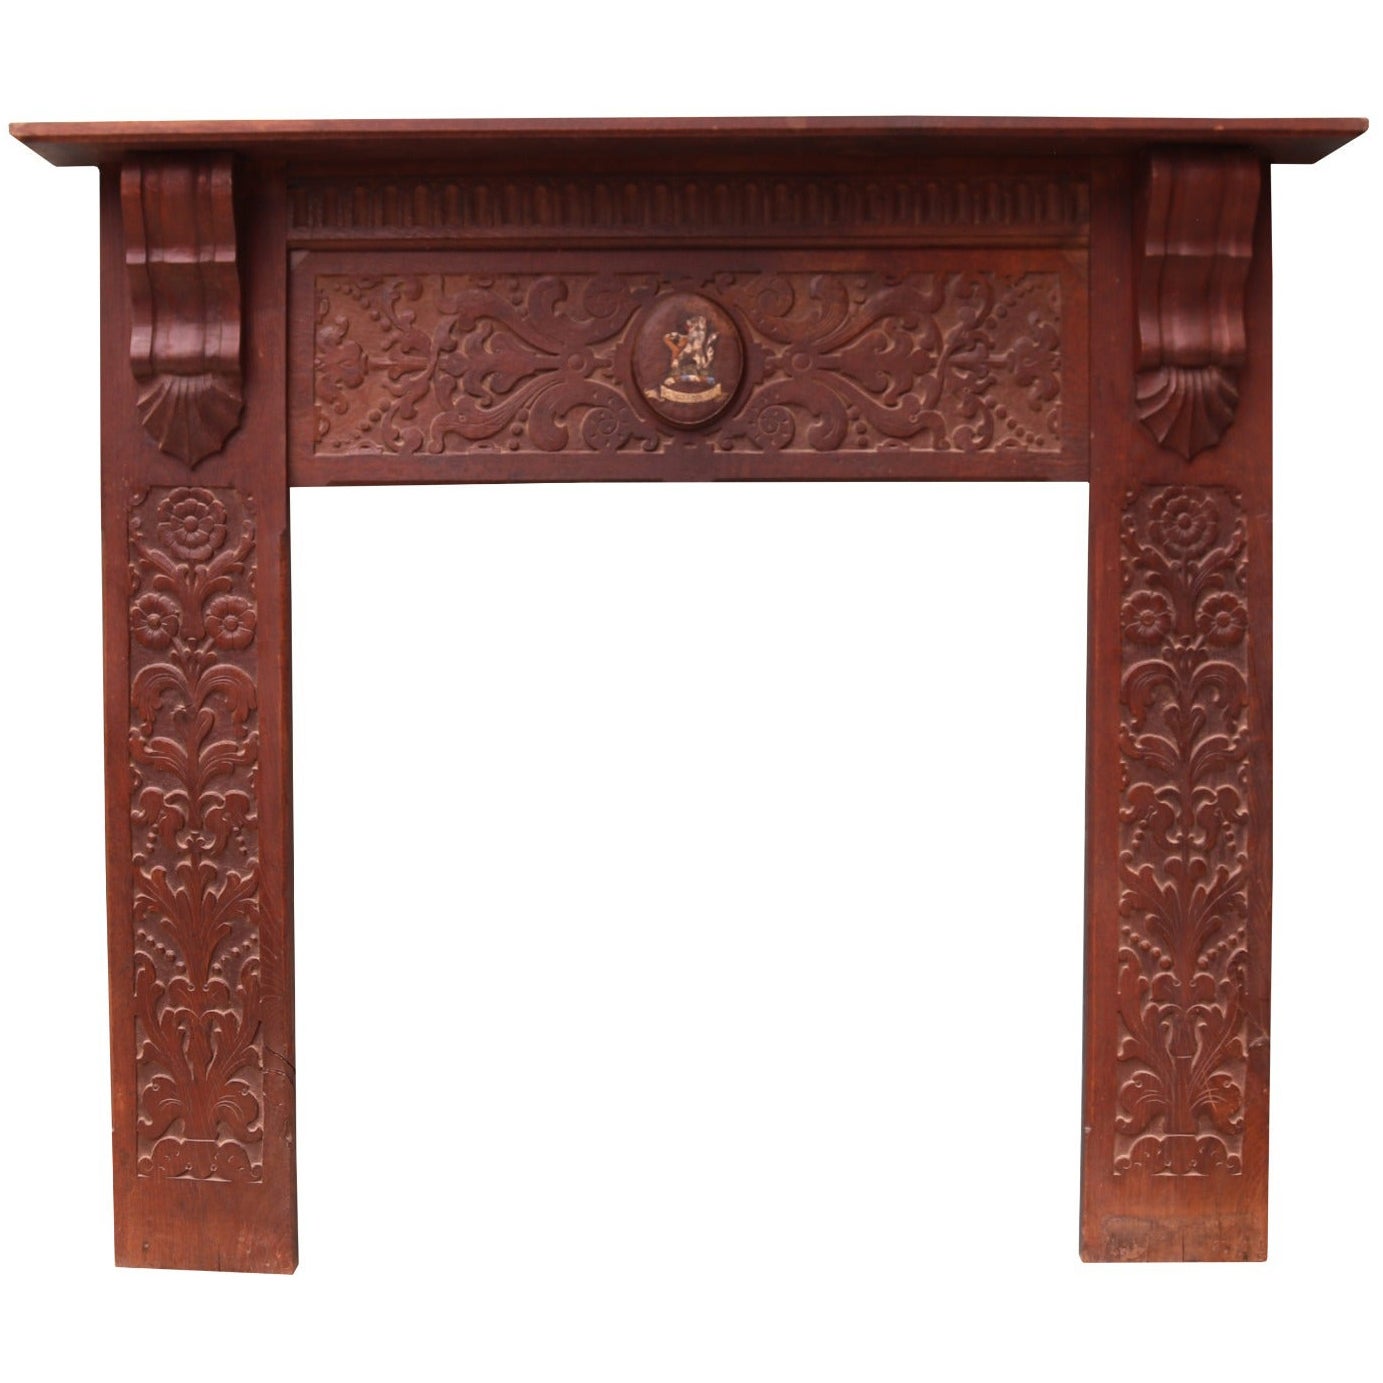 An Antique Jacobean Style Carved Oak Fireplace For Sale